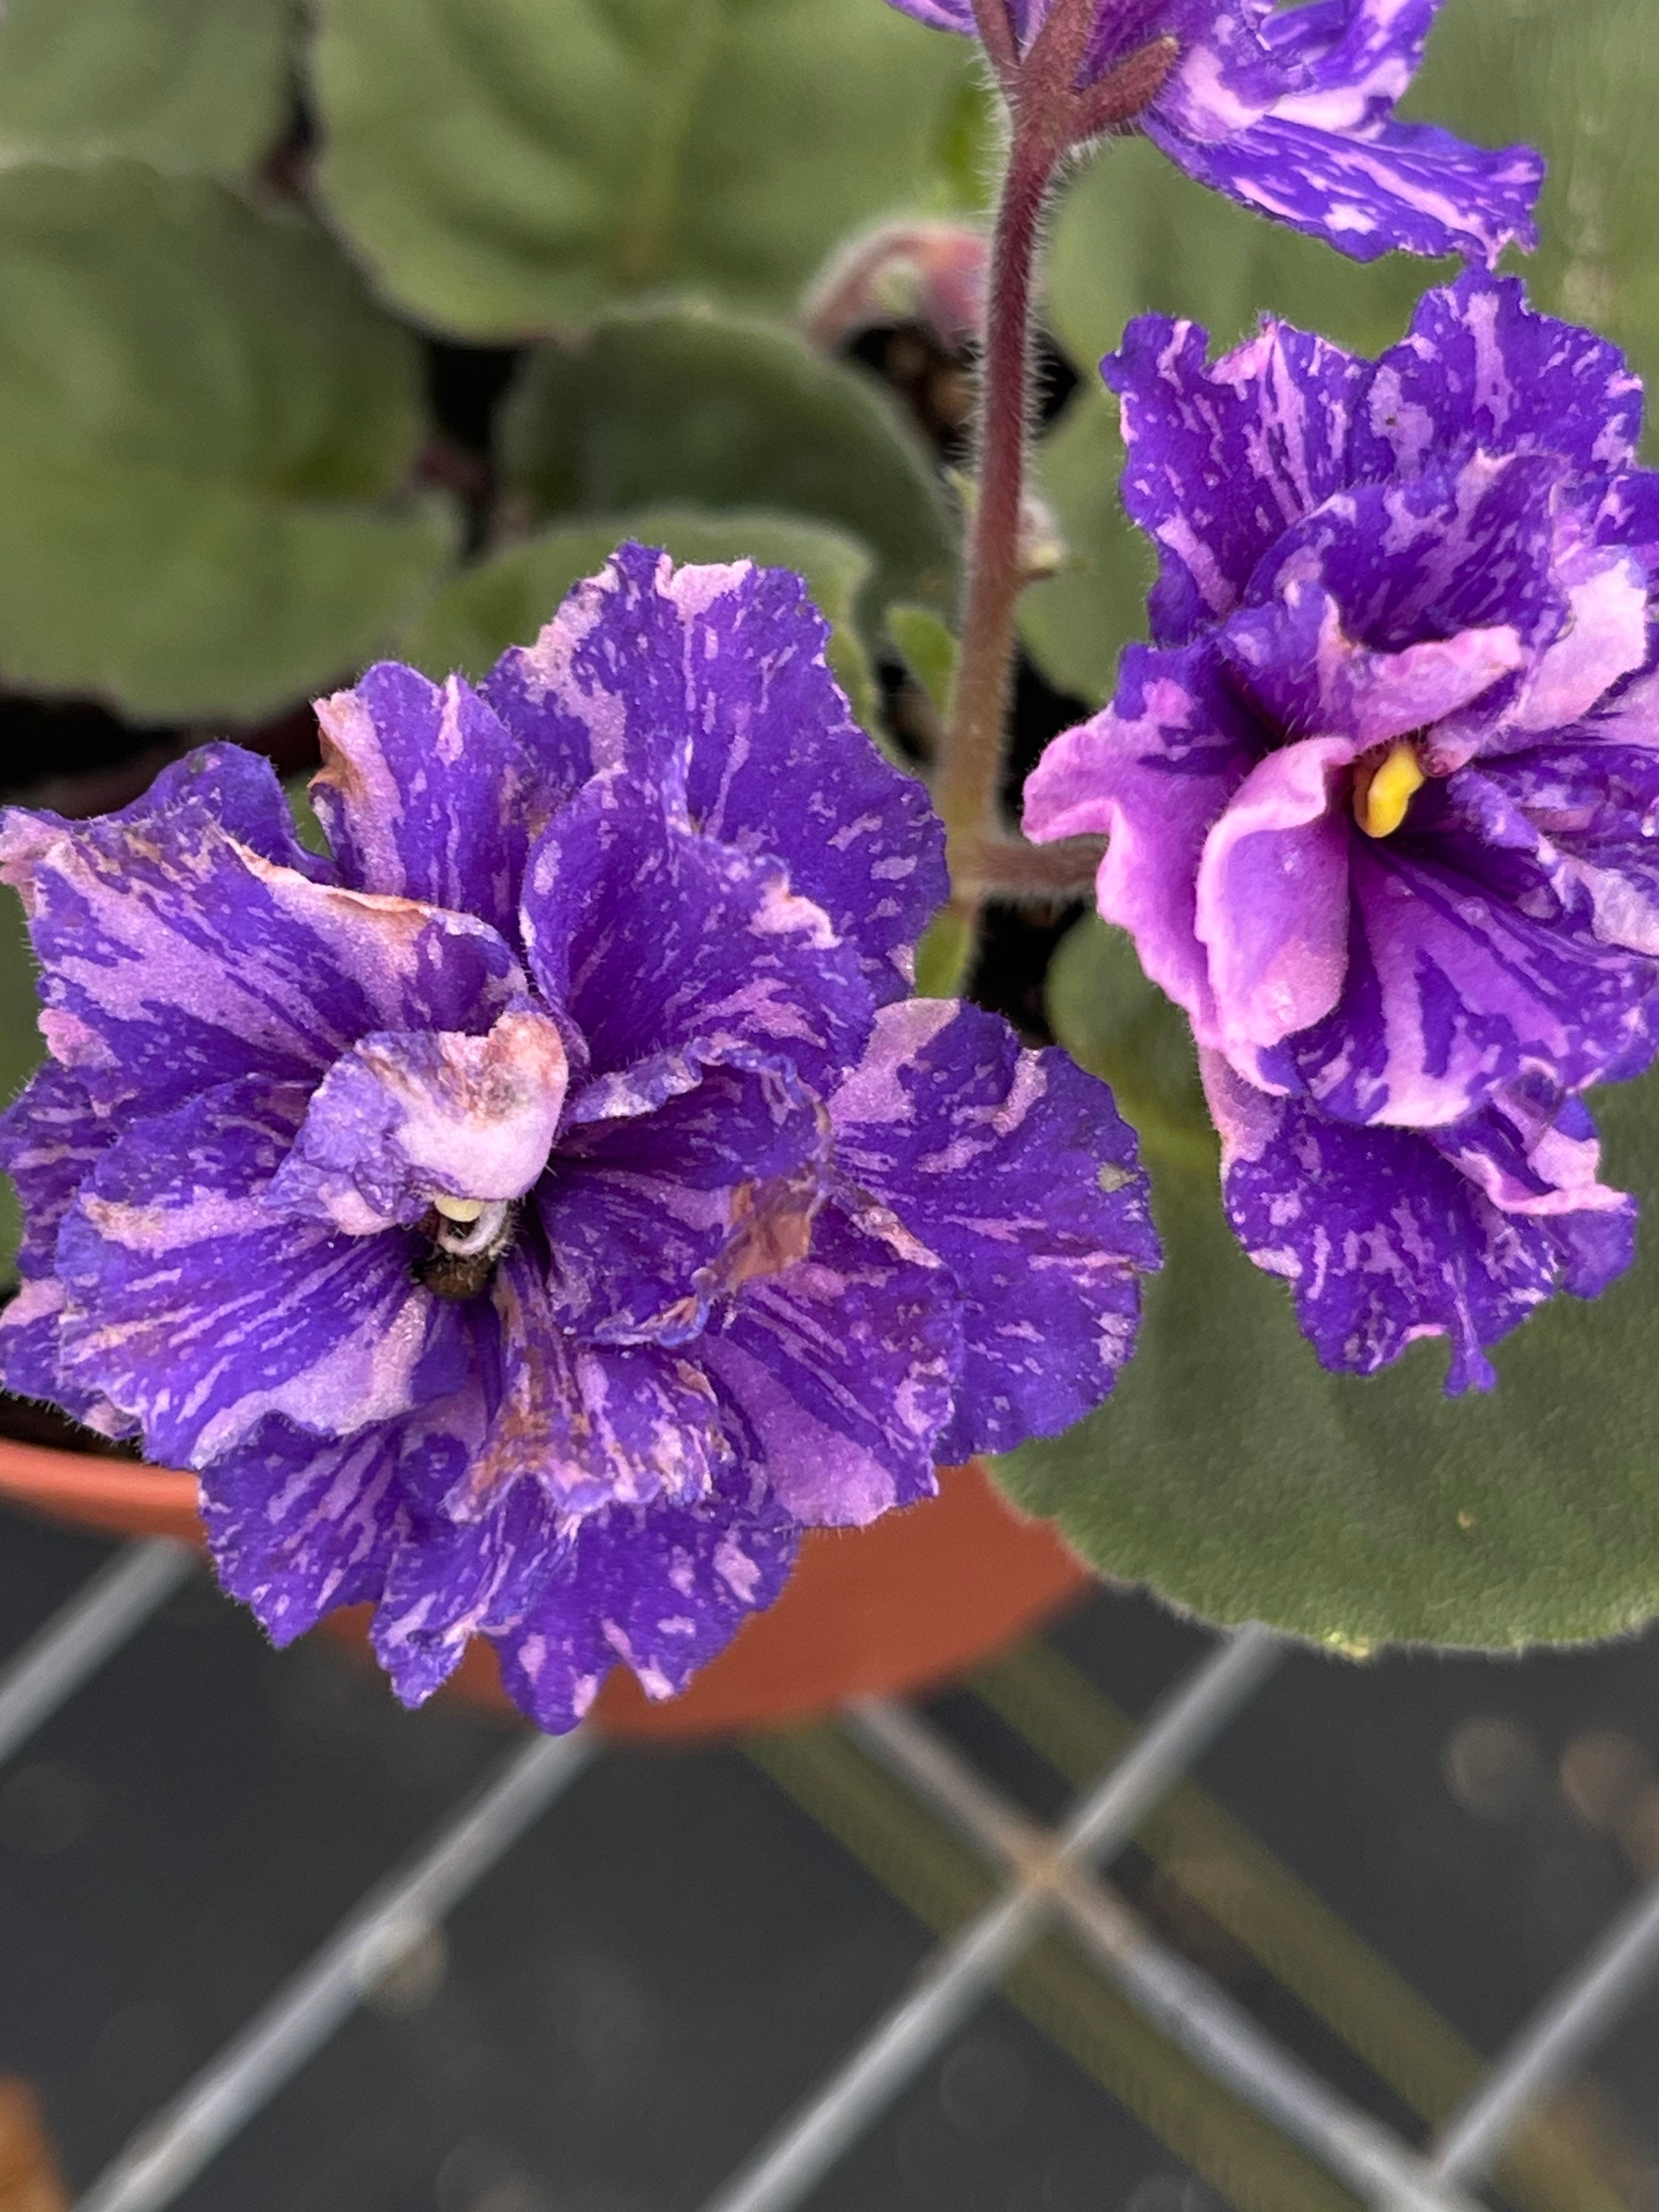 10 Variegated African Violet Seeds, Indoor House Plant, Saintpaulia  Ionantha, Purple, Pink and White SI0310 